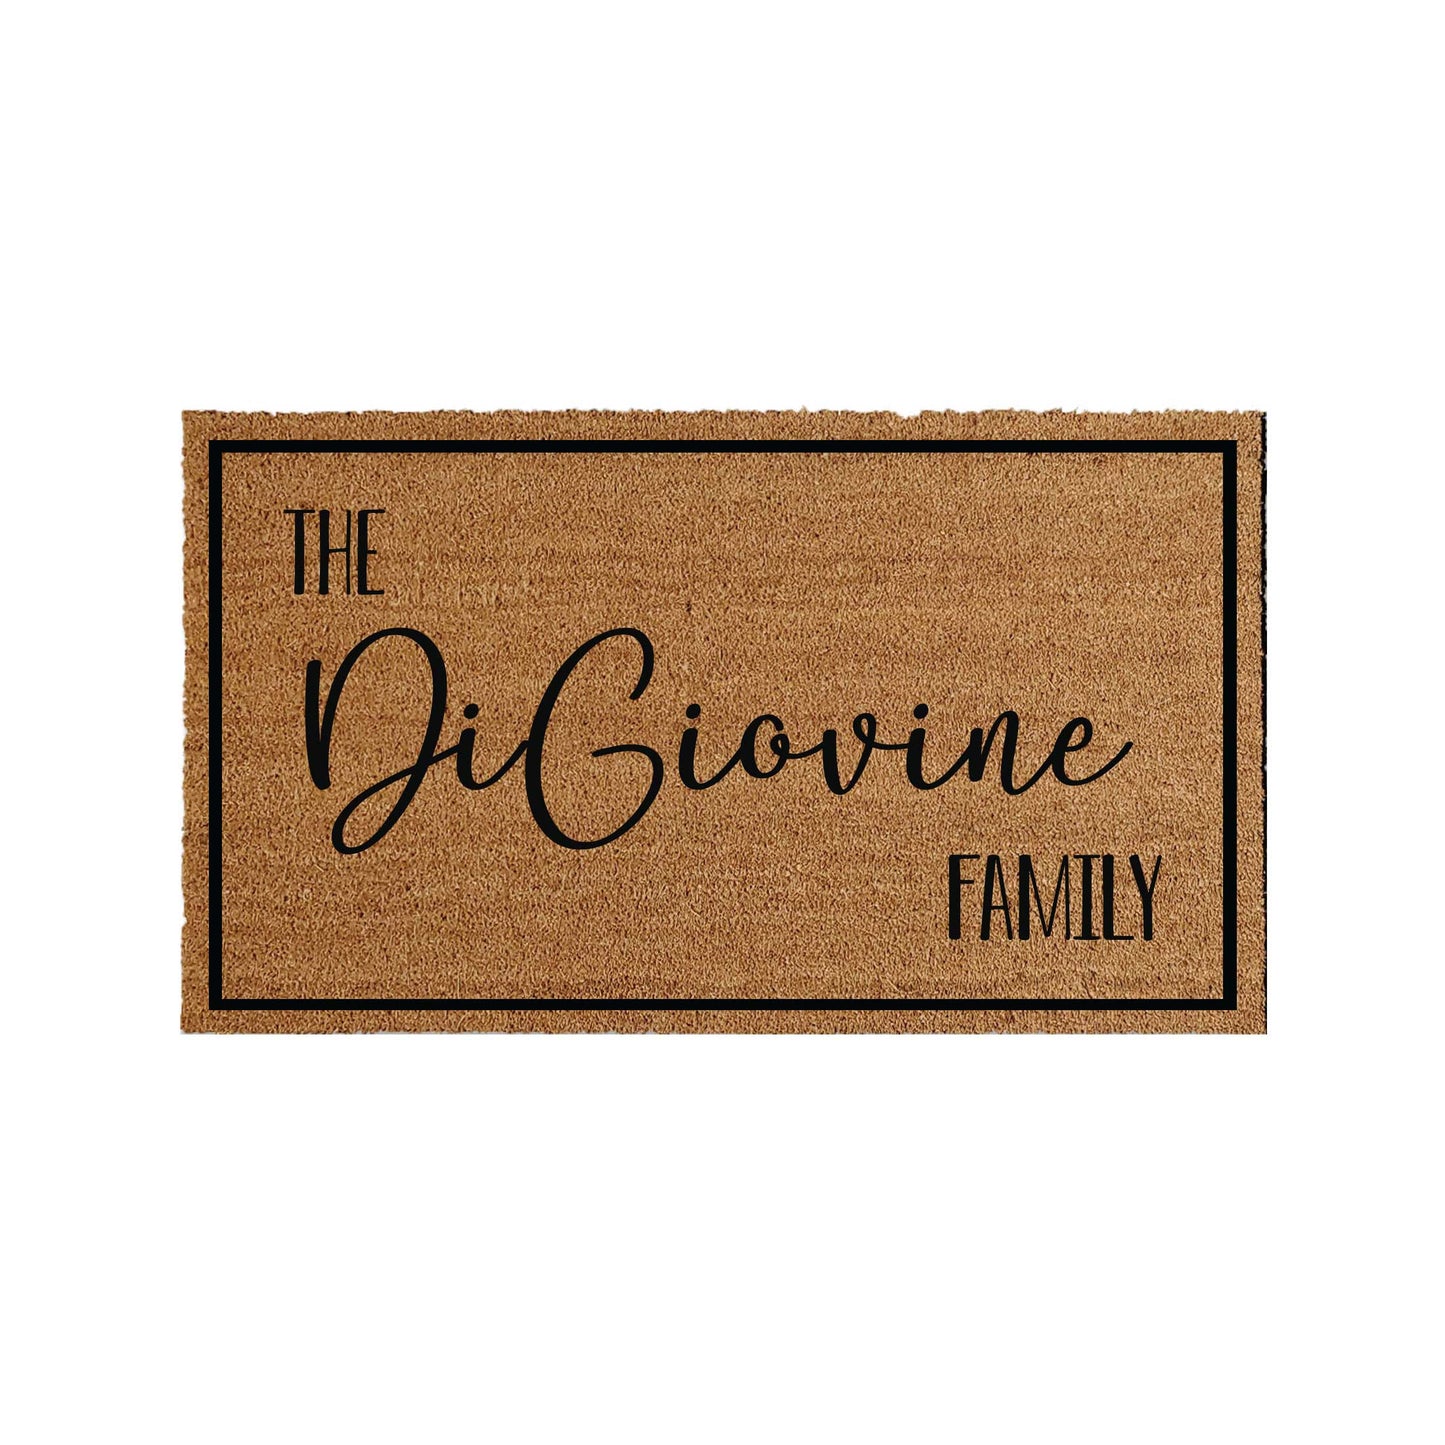 Custom coir doormat measuring 48 inches by 84 inches, featuring a personalized design or message. Made from natural coir fibers for durability and a classic look. Perfect for adding a welcoming touch to your entryway.